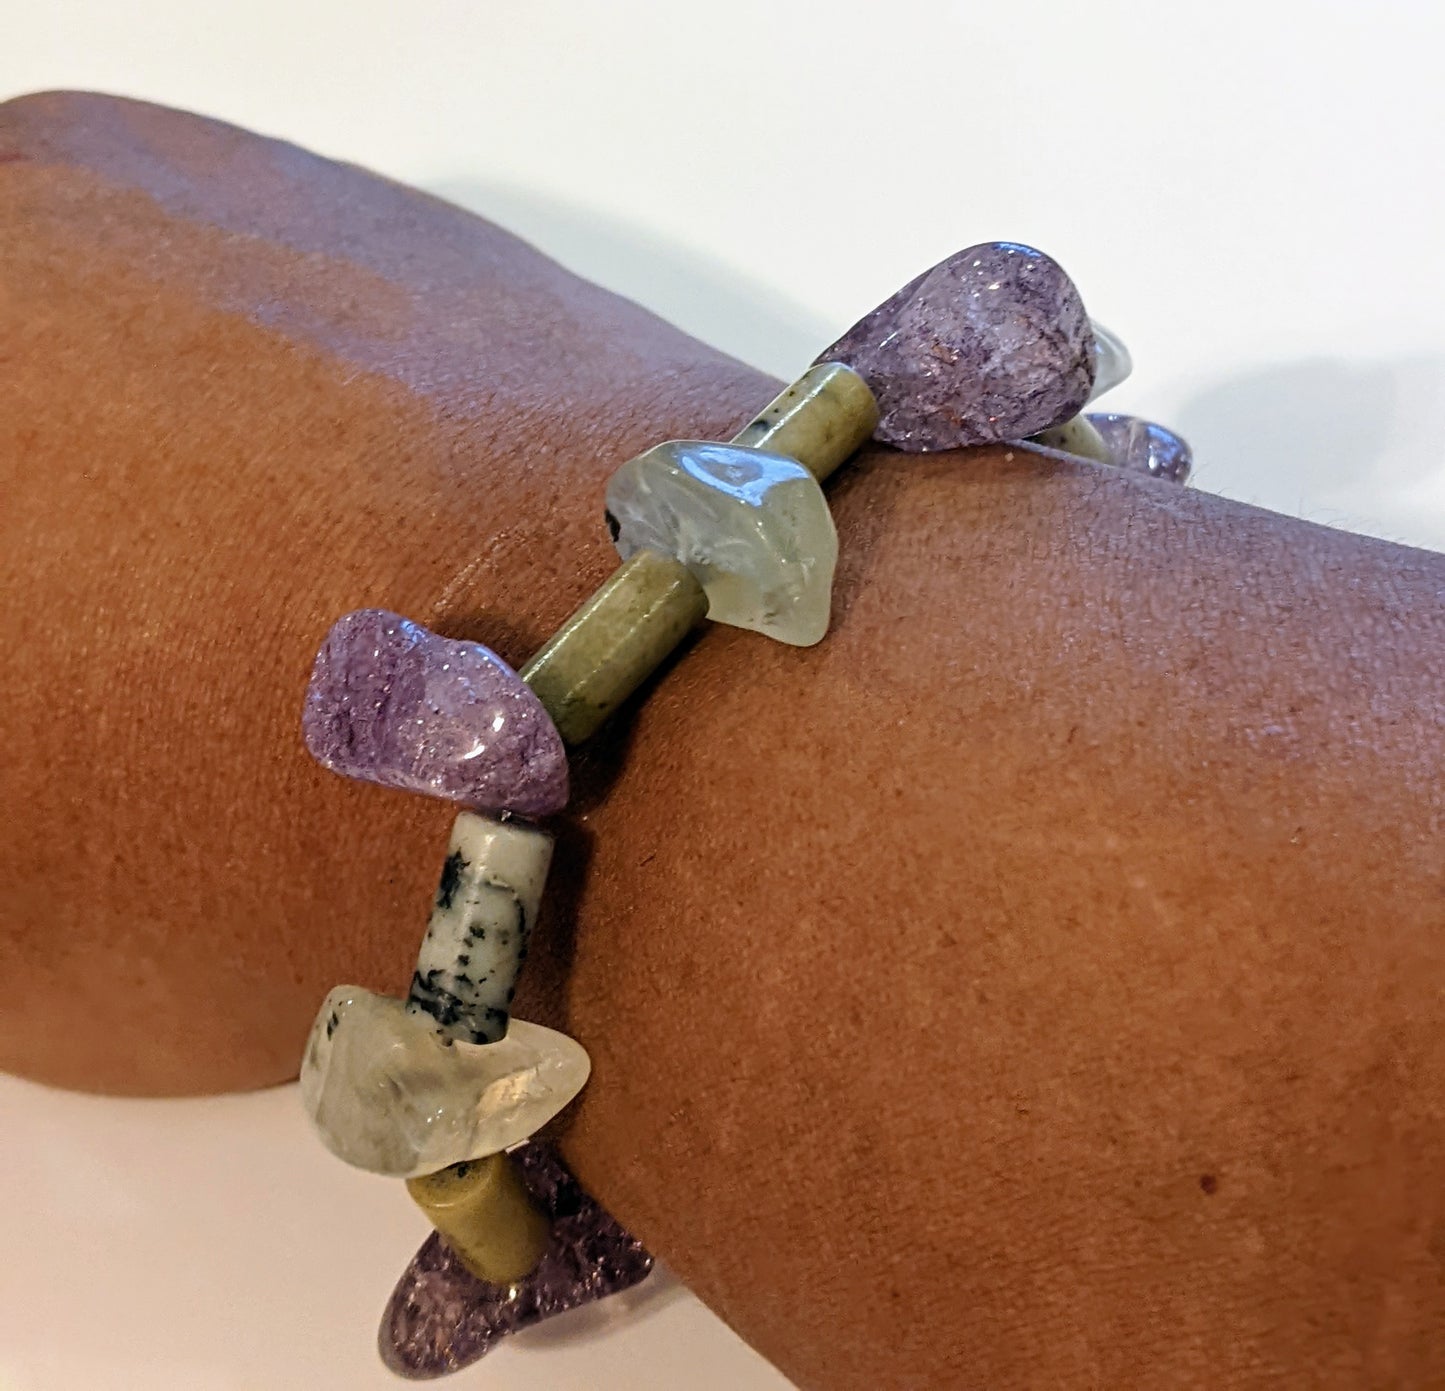 Beaded bracelet on brown person's wrist.  Bracelet is crafted from amethyst and green aventurine nuggets with stone tube beads between. 